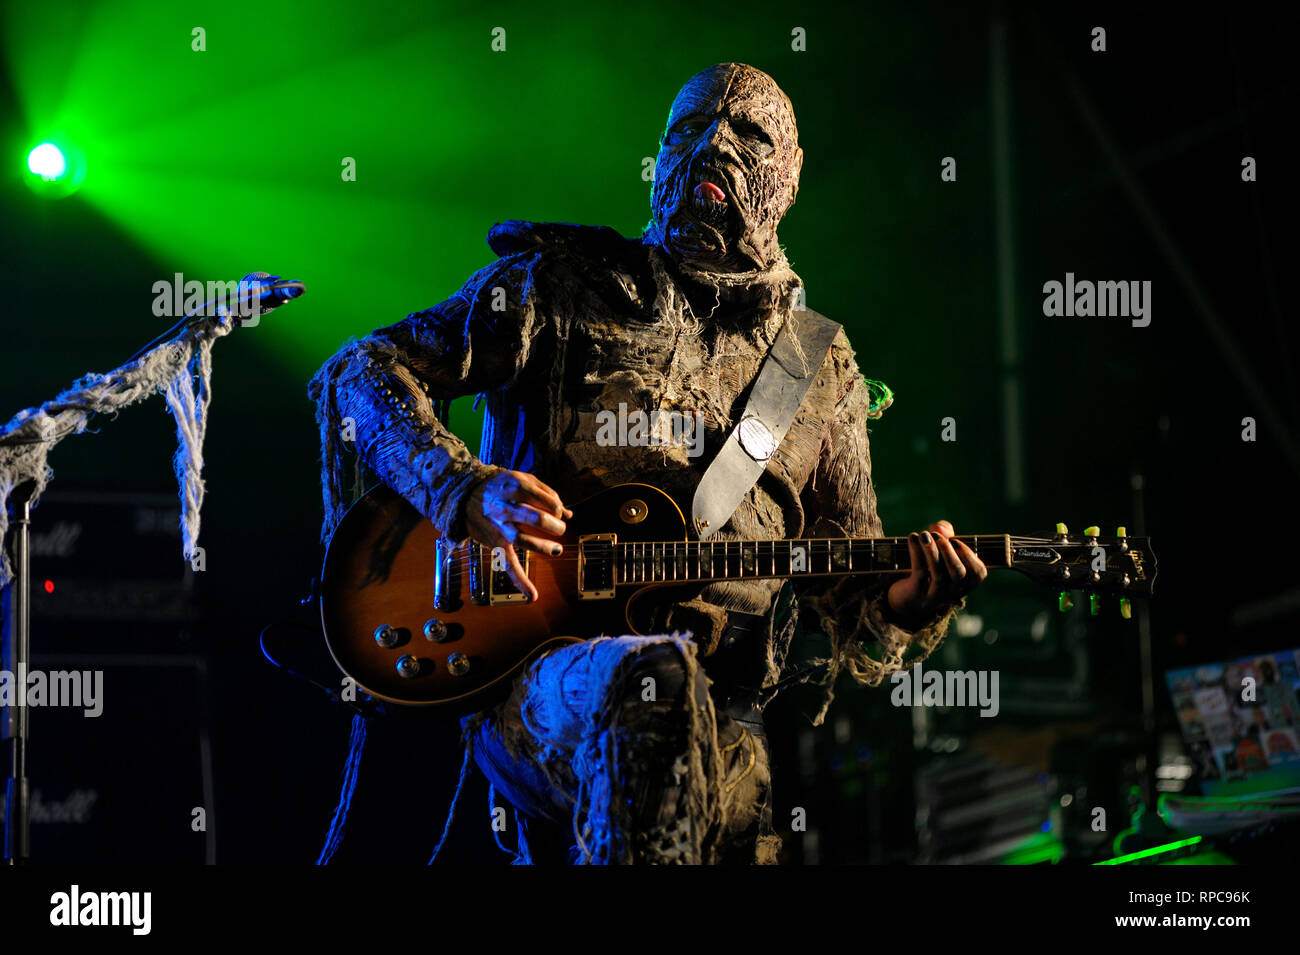 Lordi, hard rock group from Finland, performing on stage. August 23, 2017. Kiev, Ukraine Stock Photo